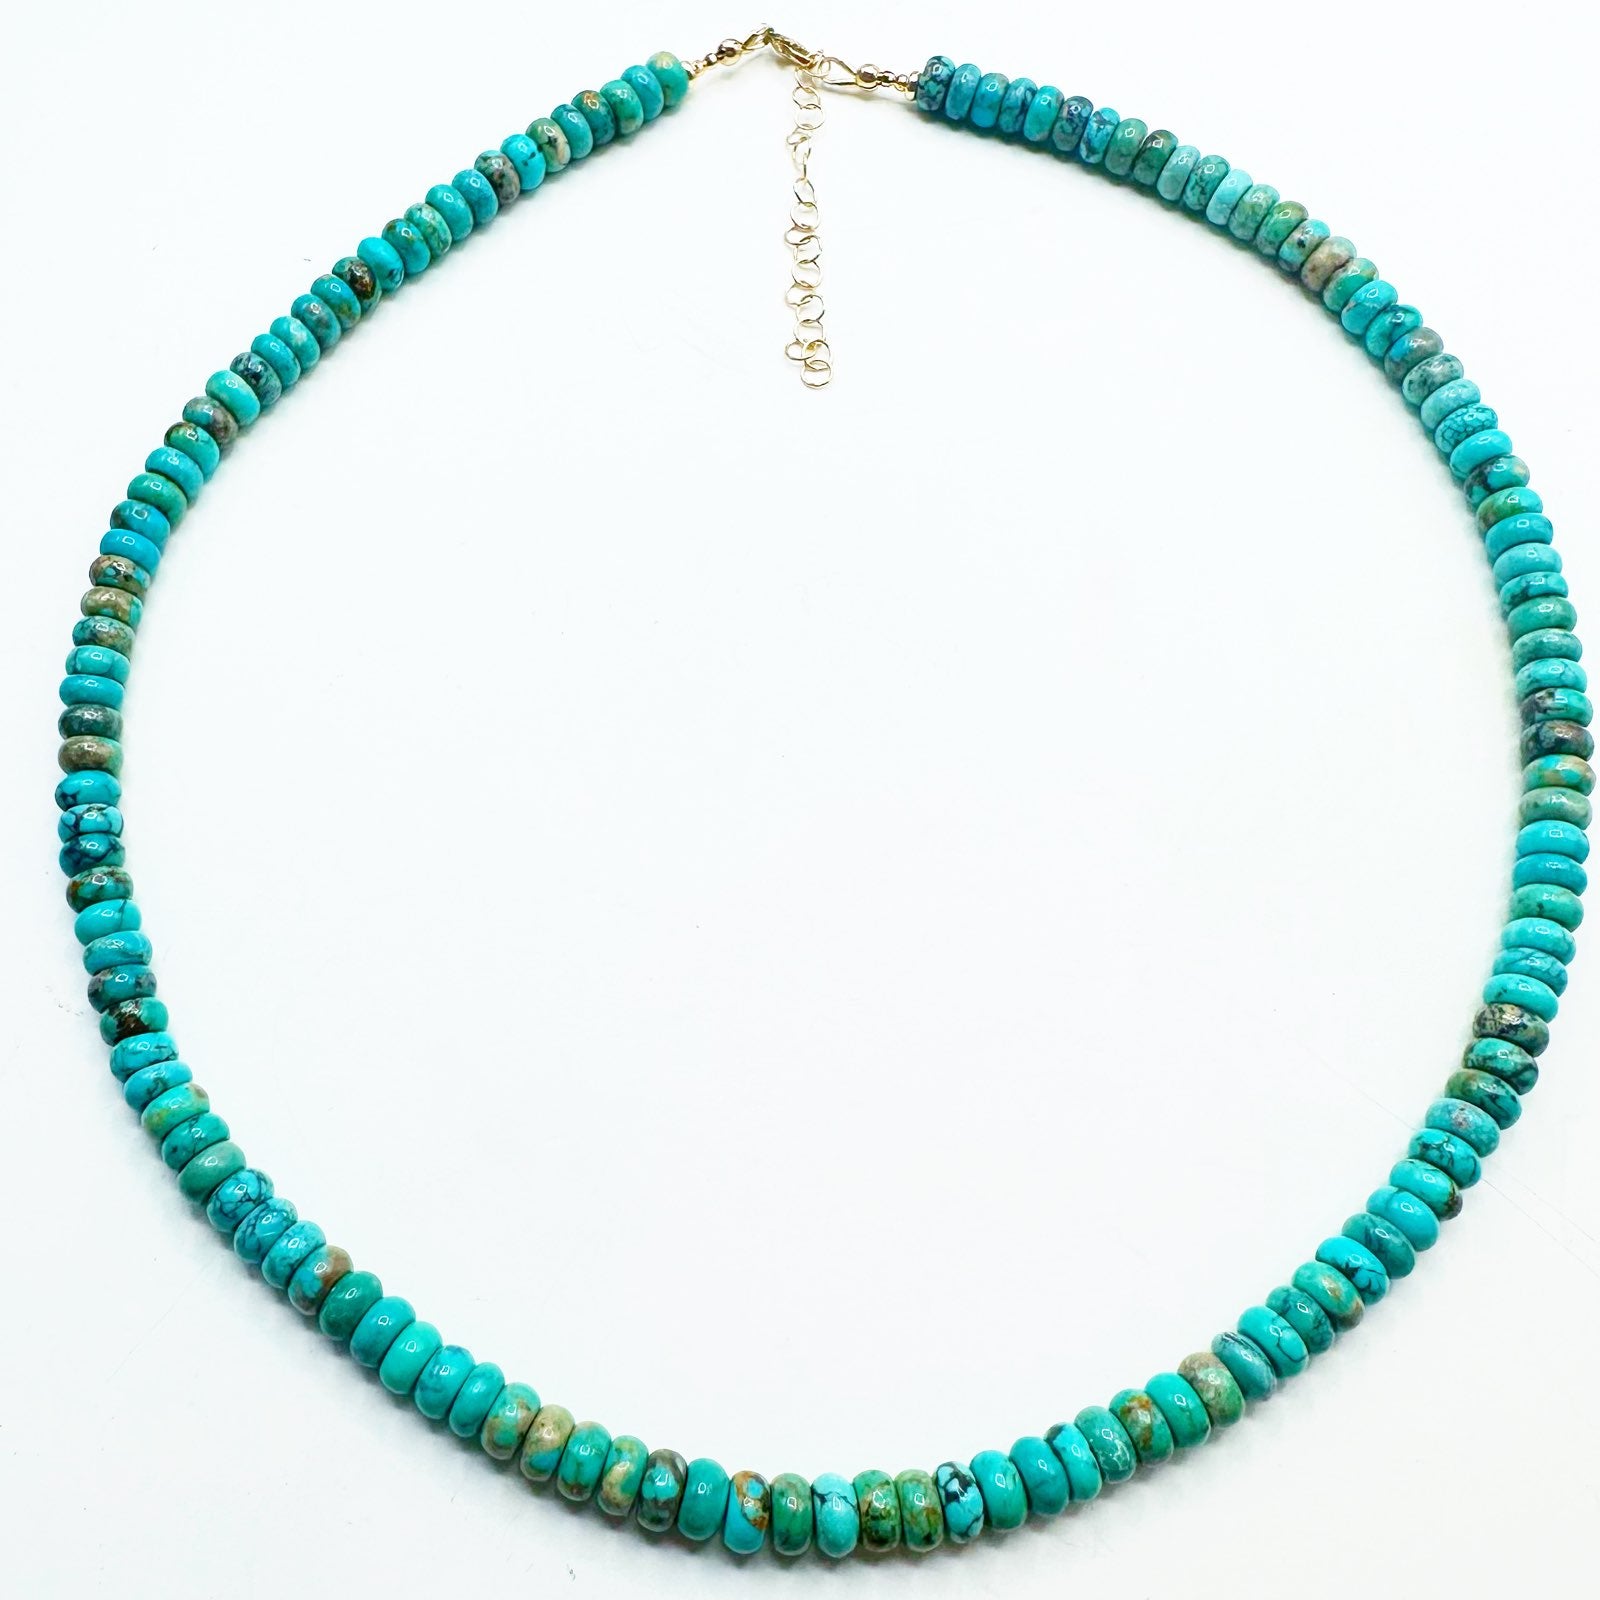 6MM & 8MM TURQUOISE NECKLACES